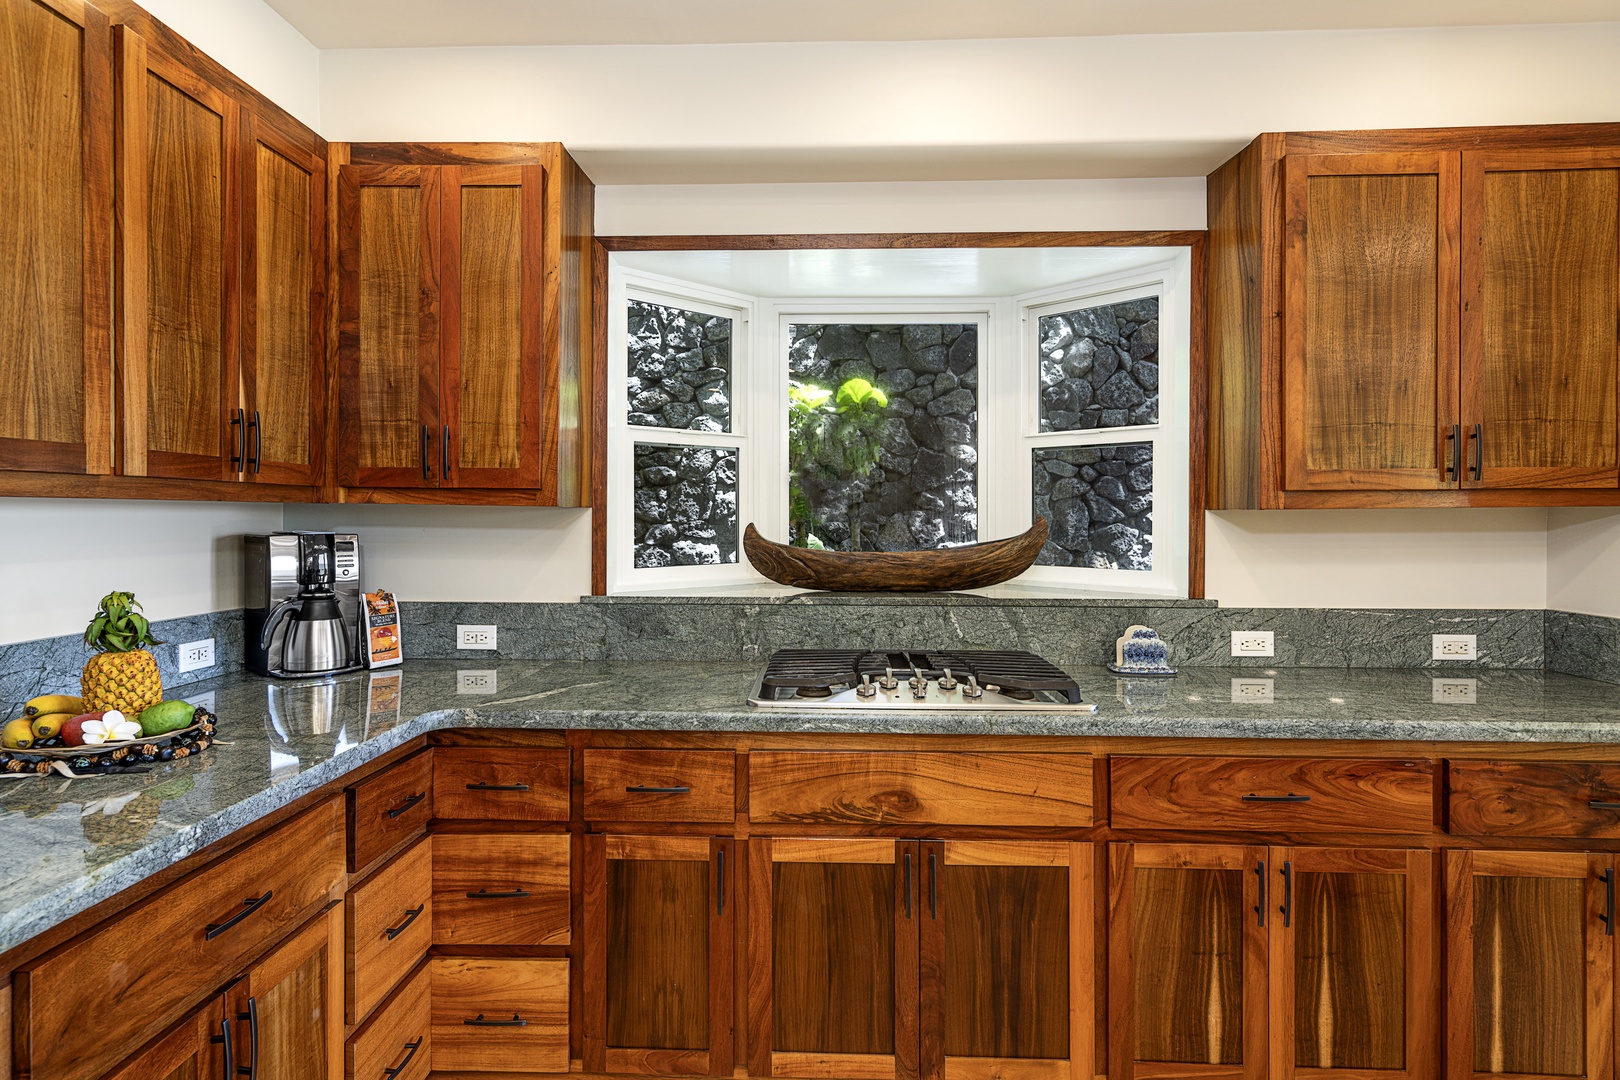 Kailua Kona Vacation Rentals, Ali'i Point #7 - Gas cook top for your meal preparation needs